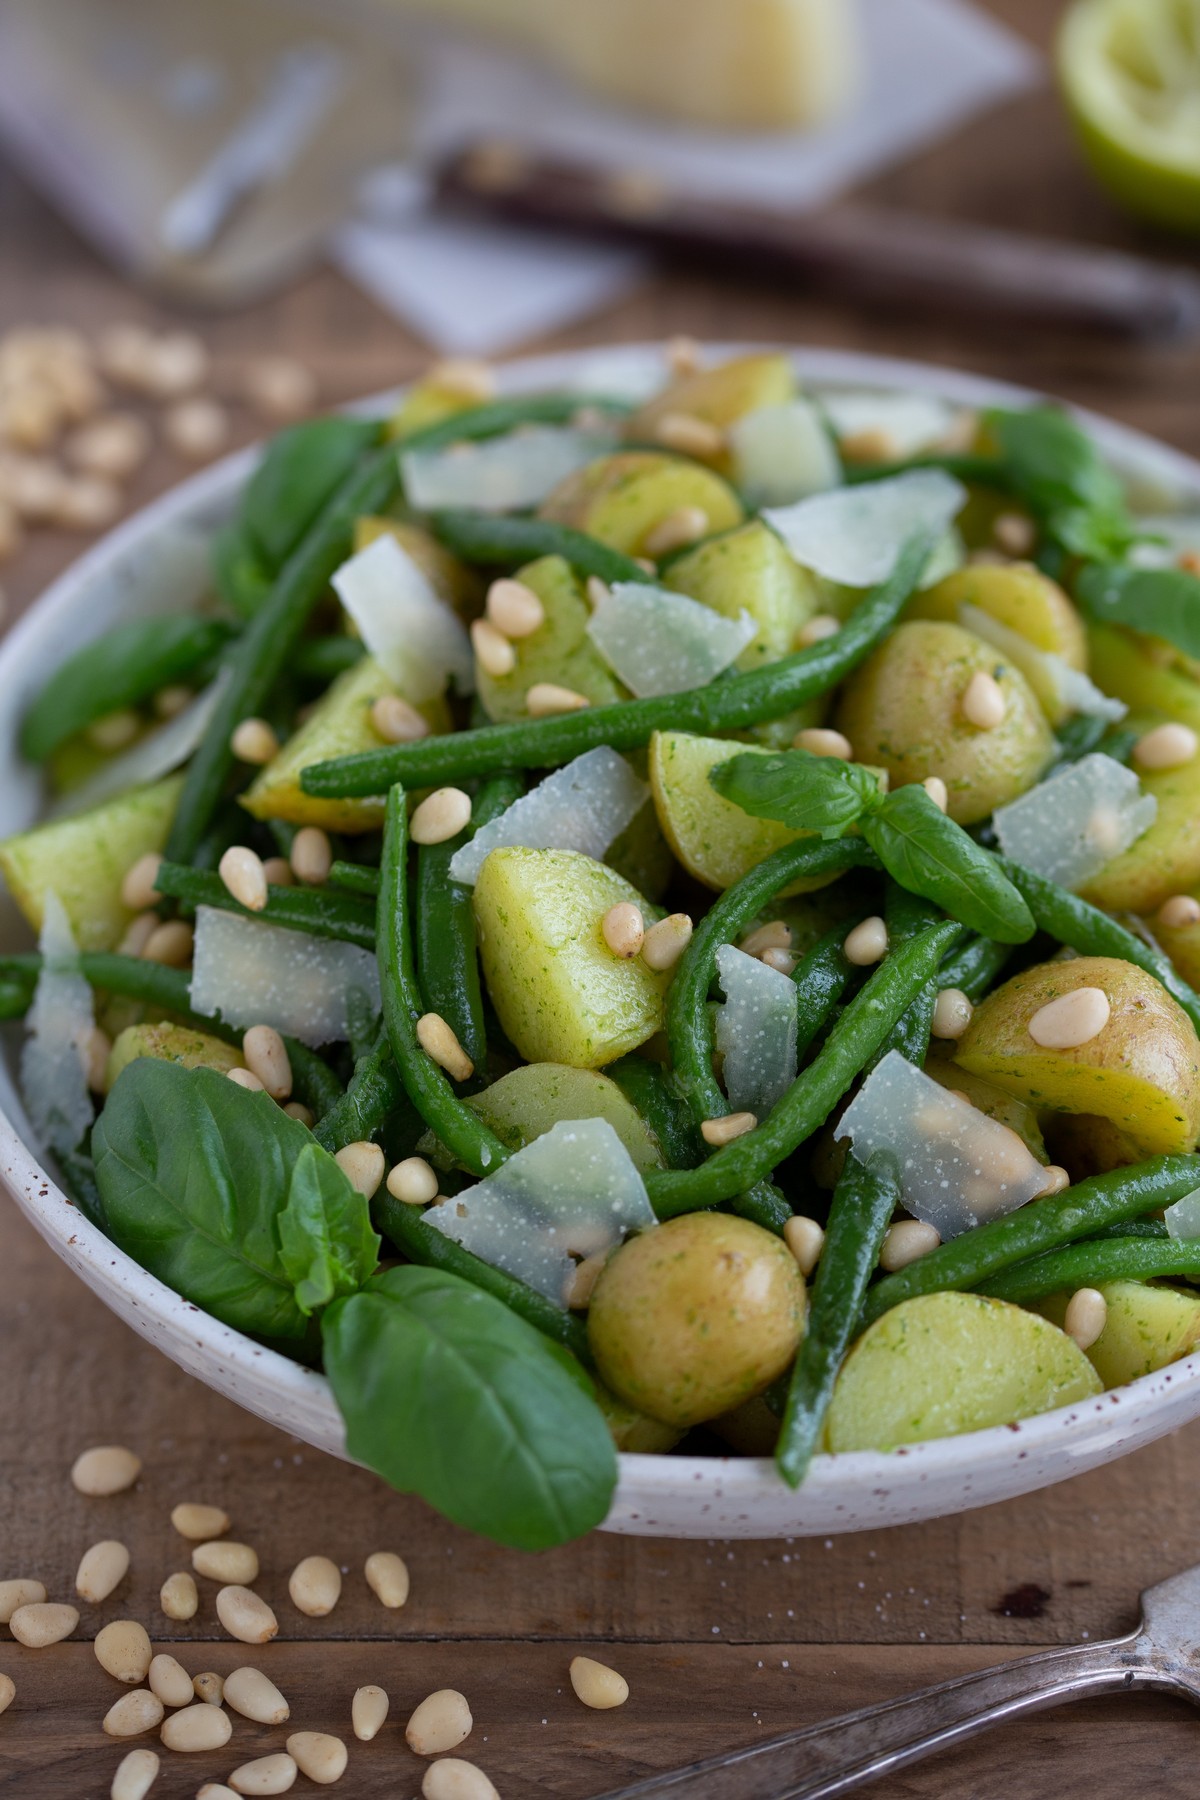 Baby potato salad with green beans and pesto dressing.